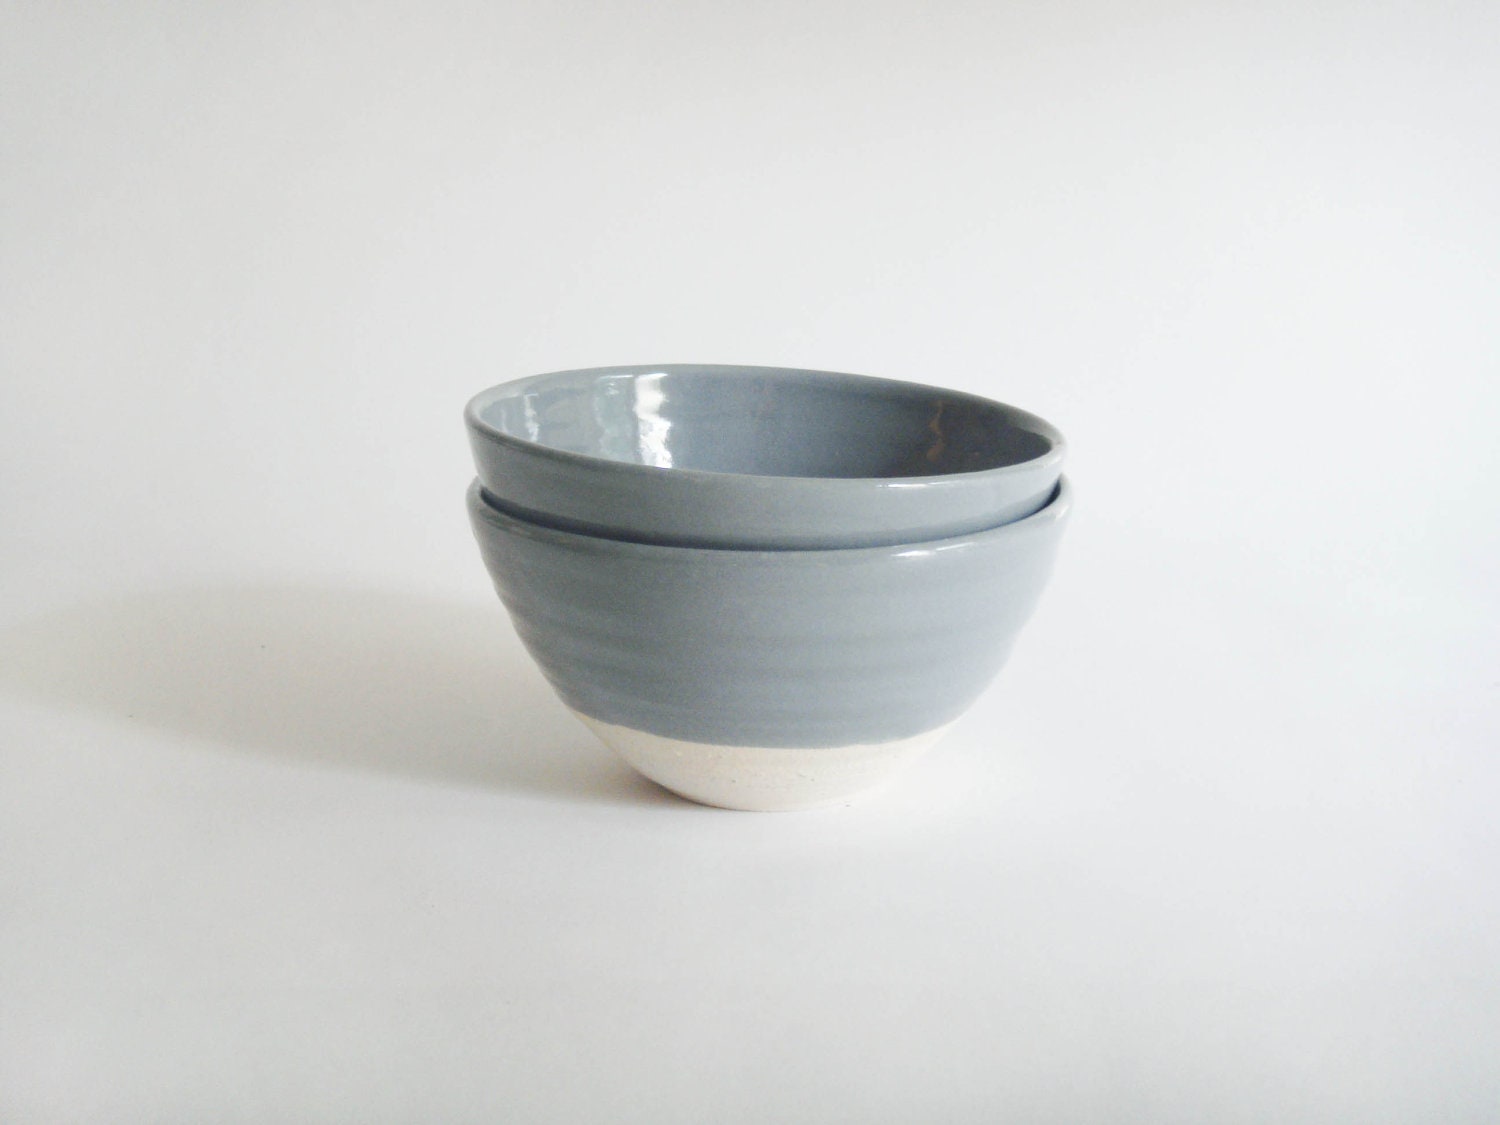 Two small grey and white pottery bowls, minimal and fresh, Forest series - juliapaulpottery